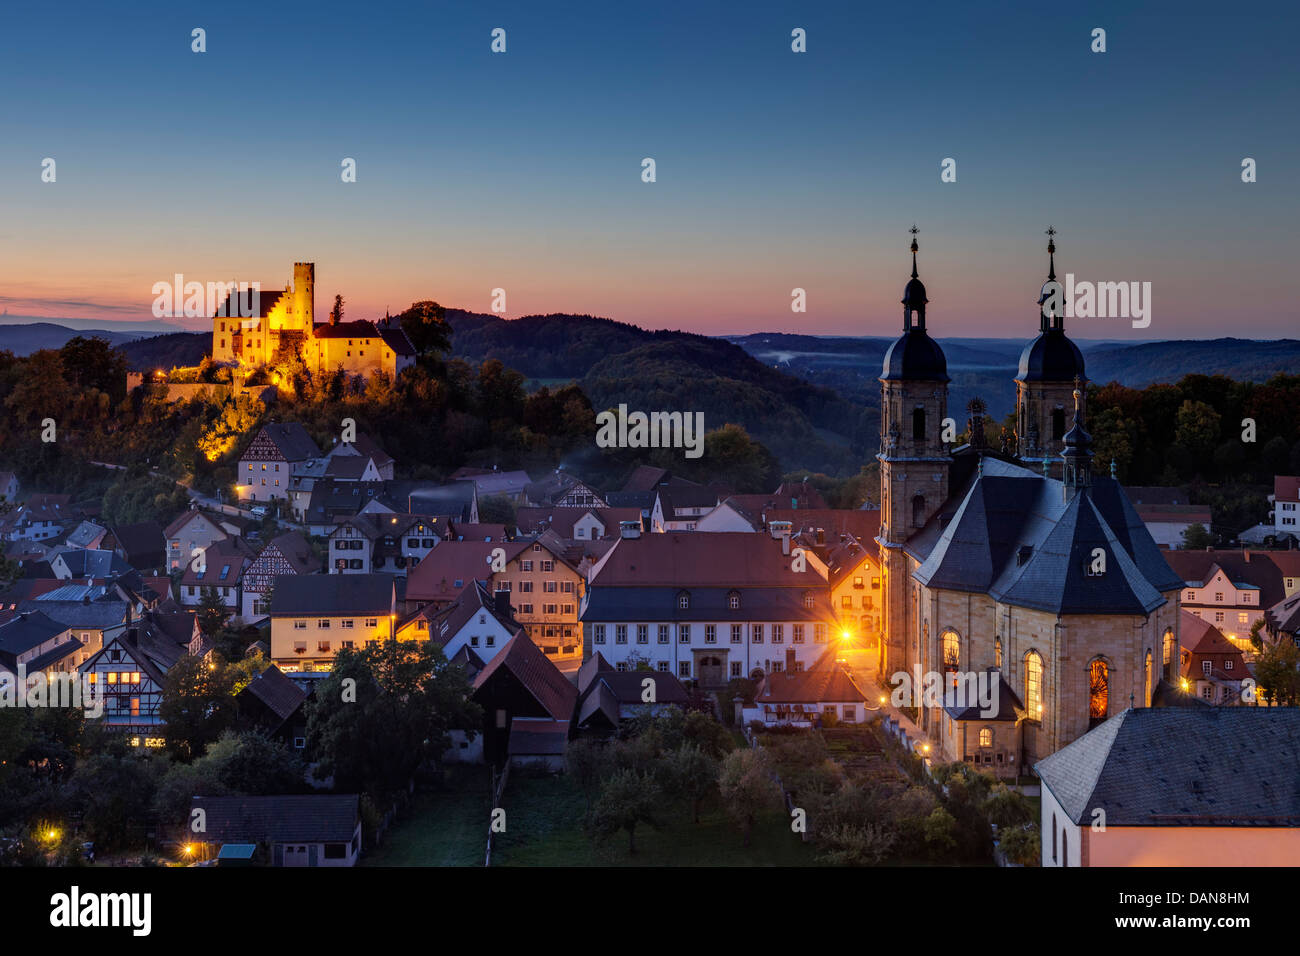 Germany, Bavaria, View of Goessweinstein Basilica and Castle at night Stock Photo